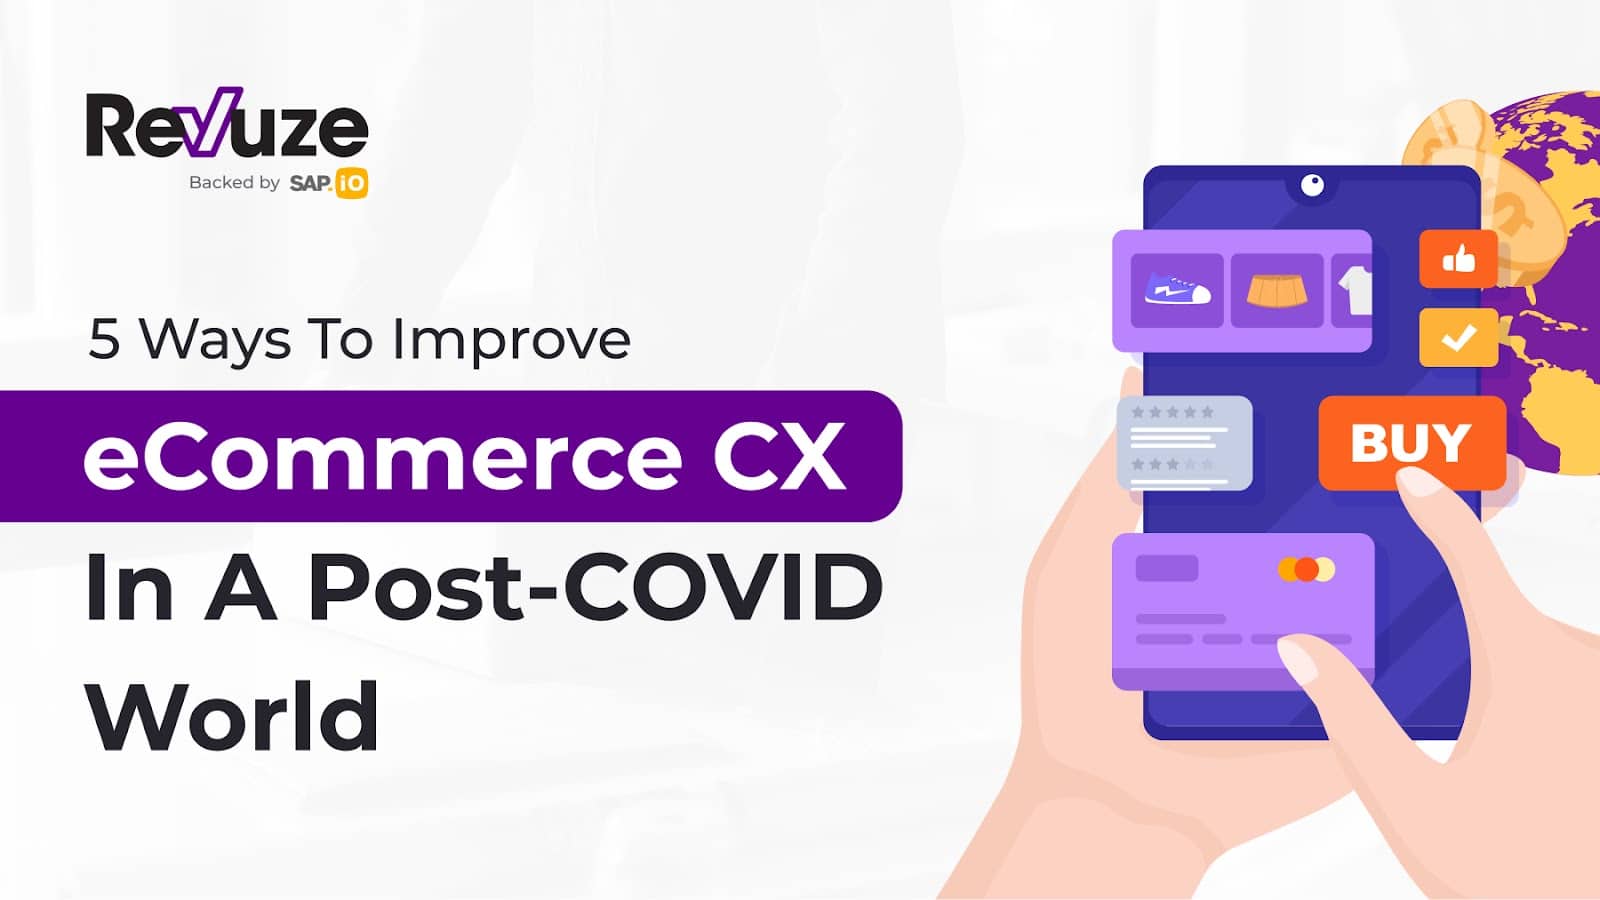 5 Ways To Improve Ecommerce Customer Experience in a Post-COVID World